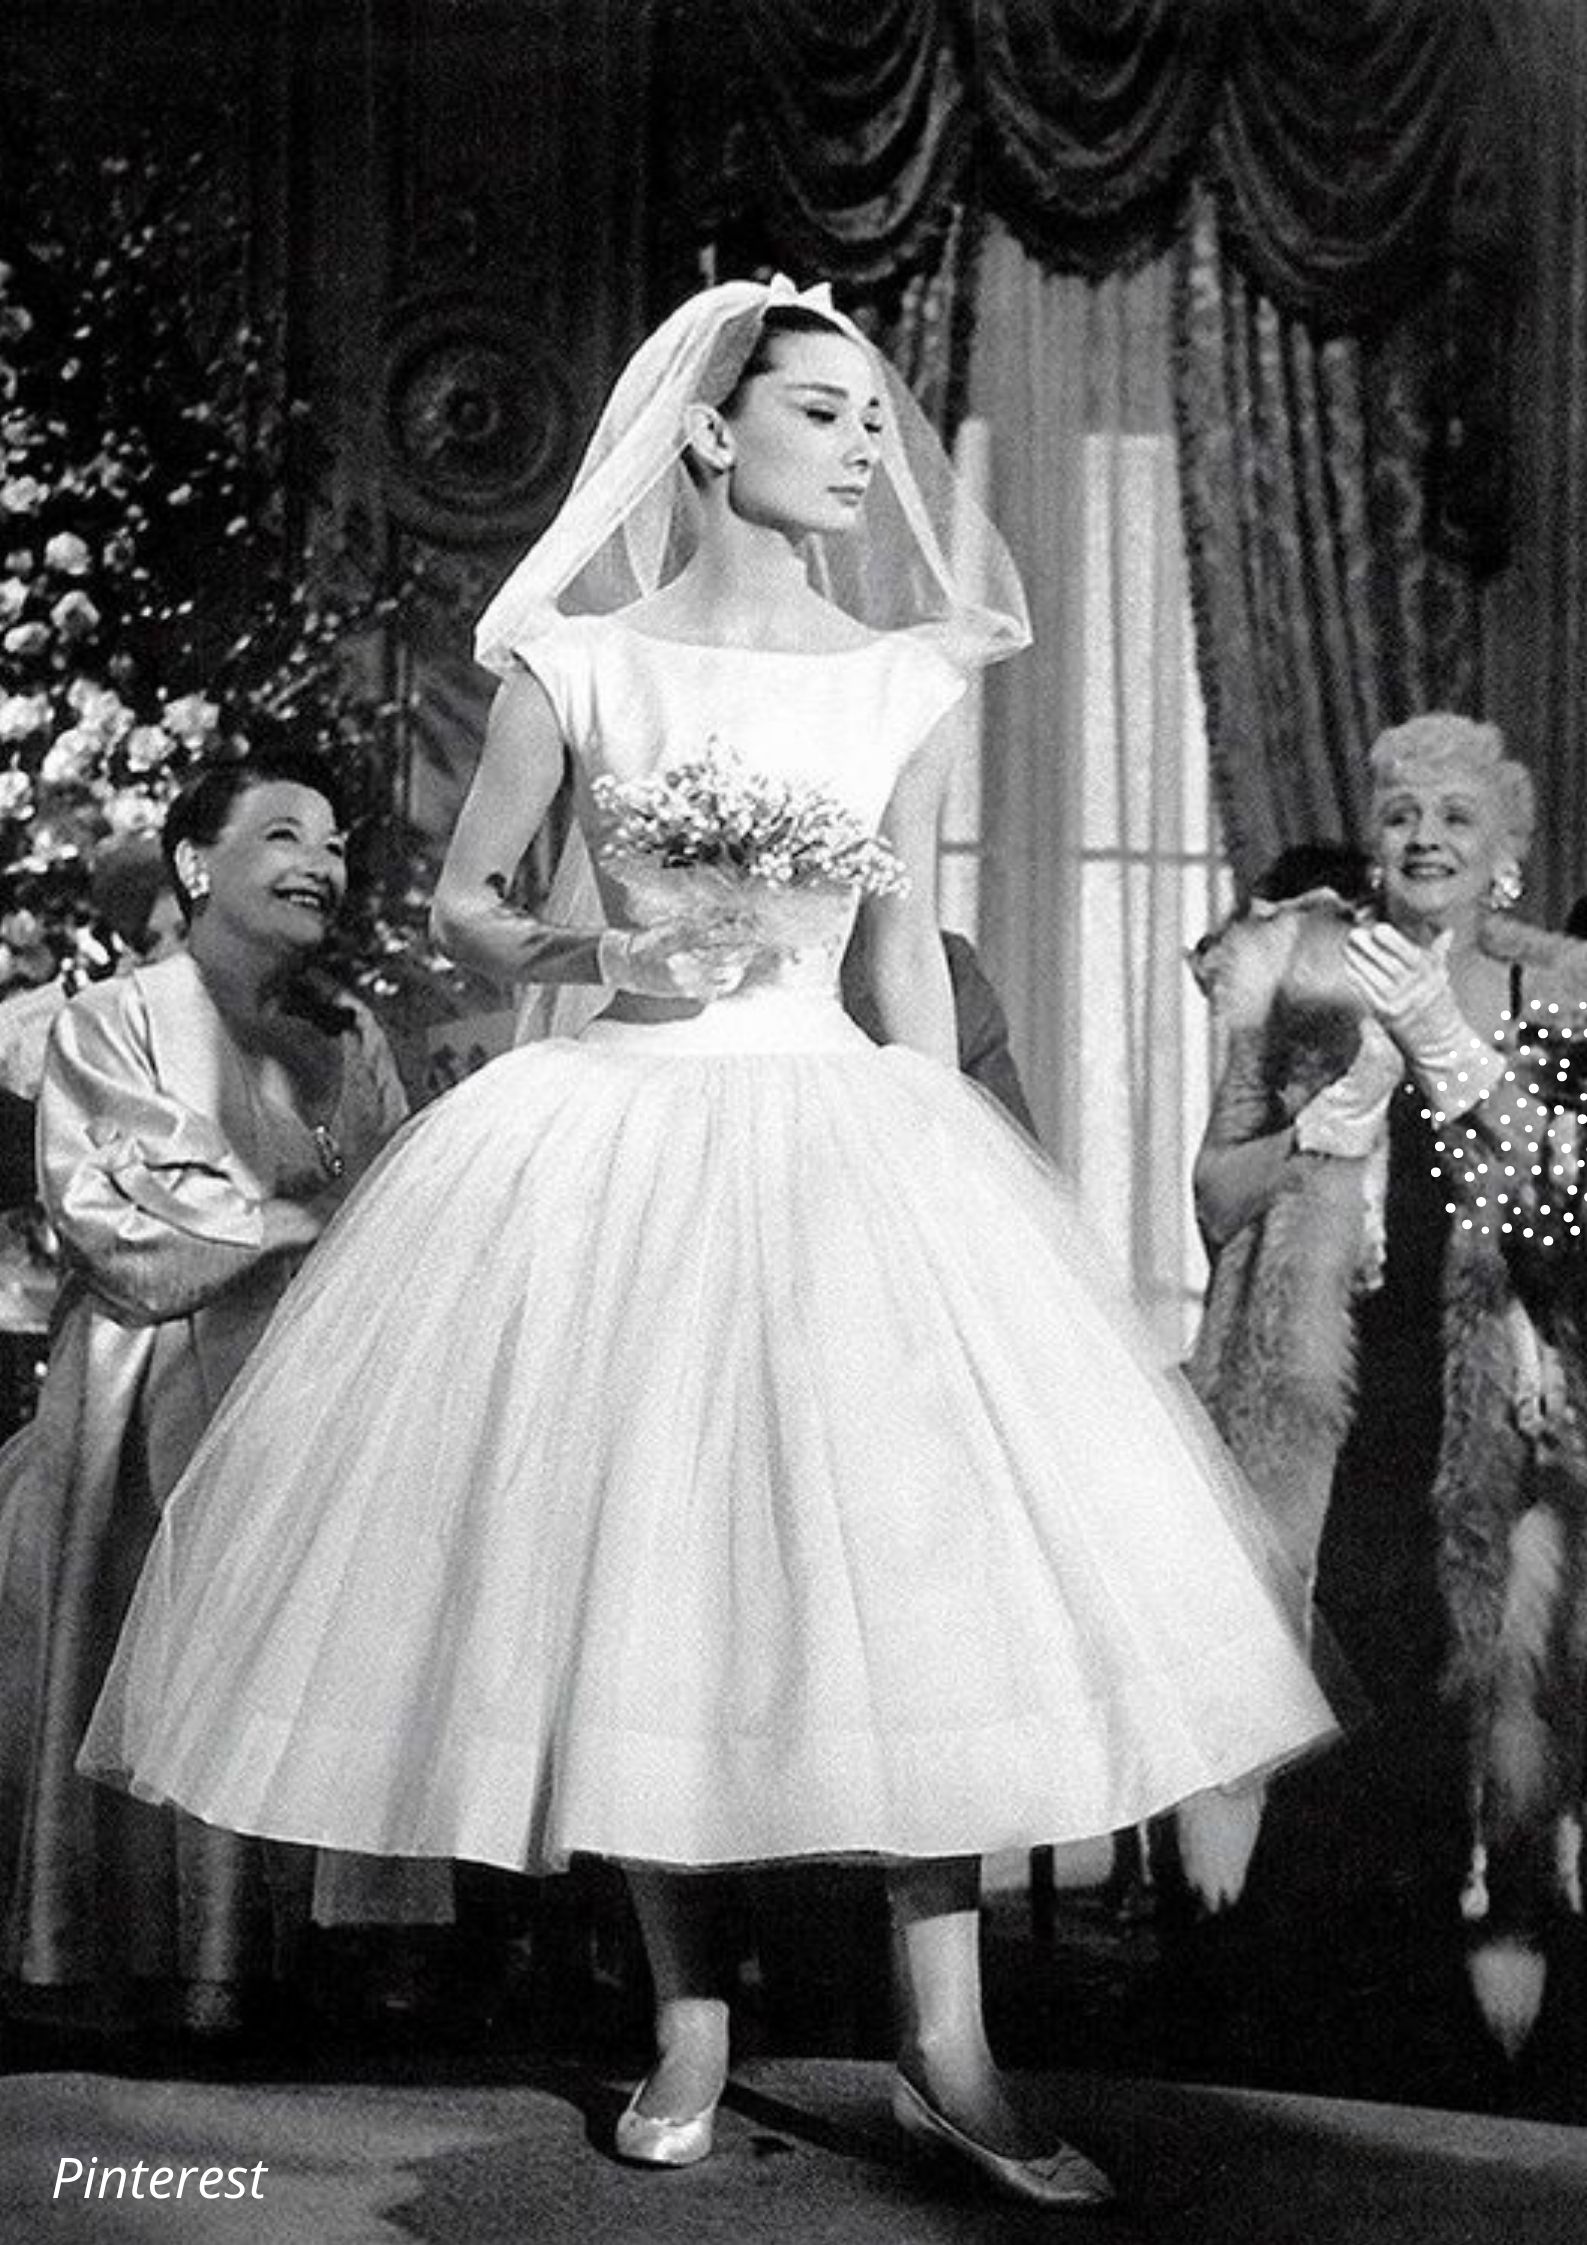 21 Iconic Celebrity Wedding Dresses from the Last 10 Years